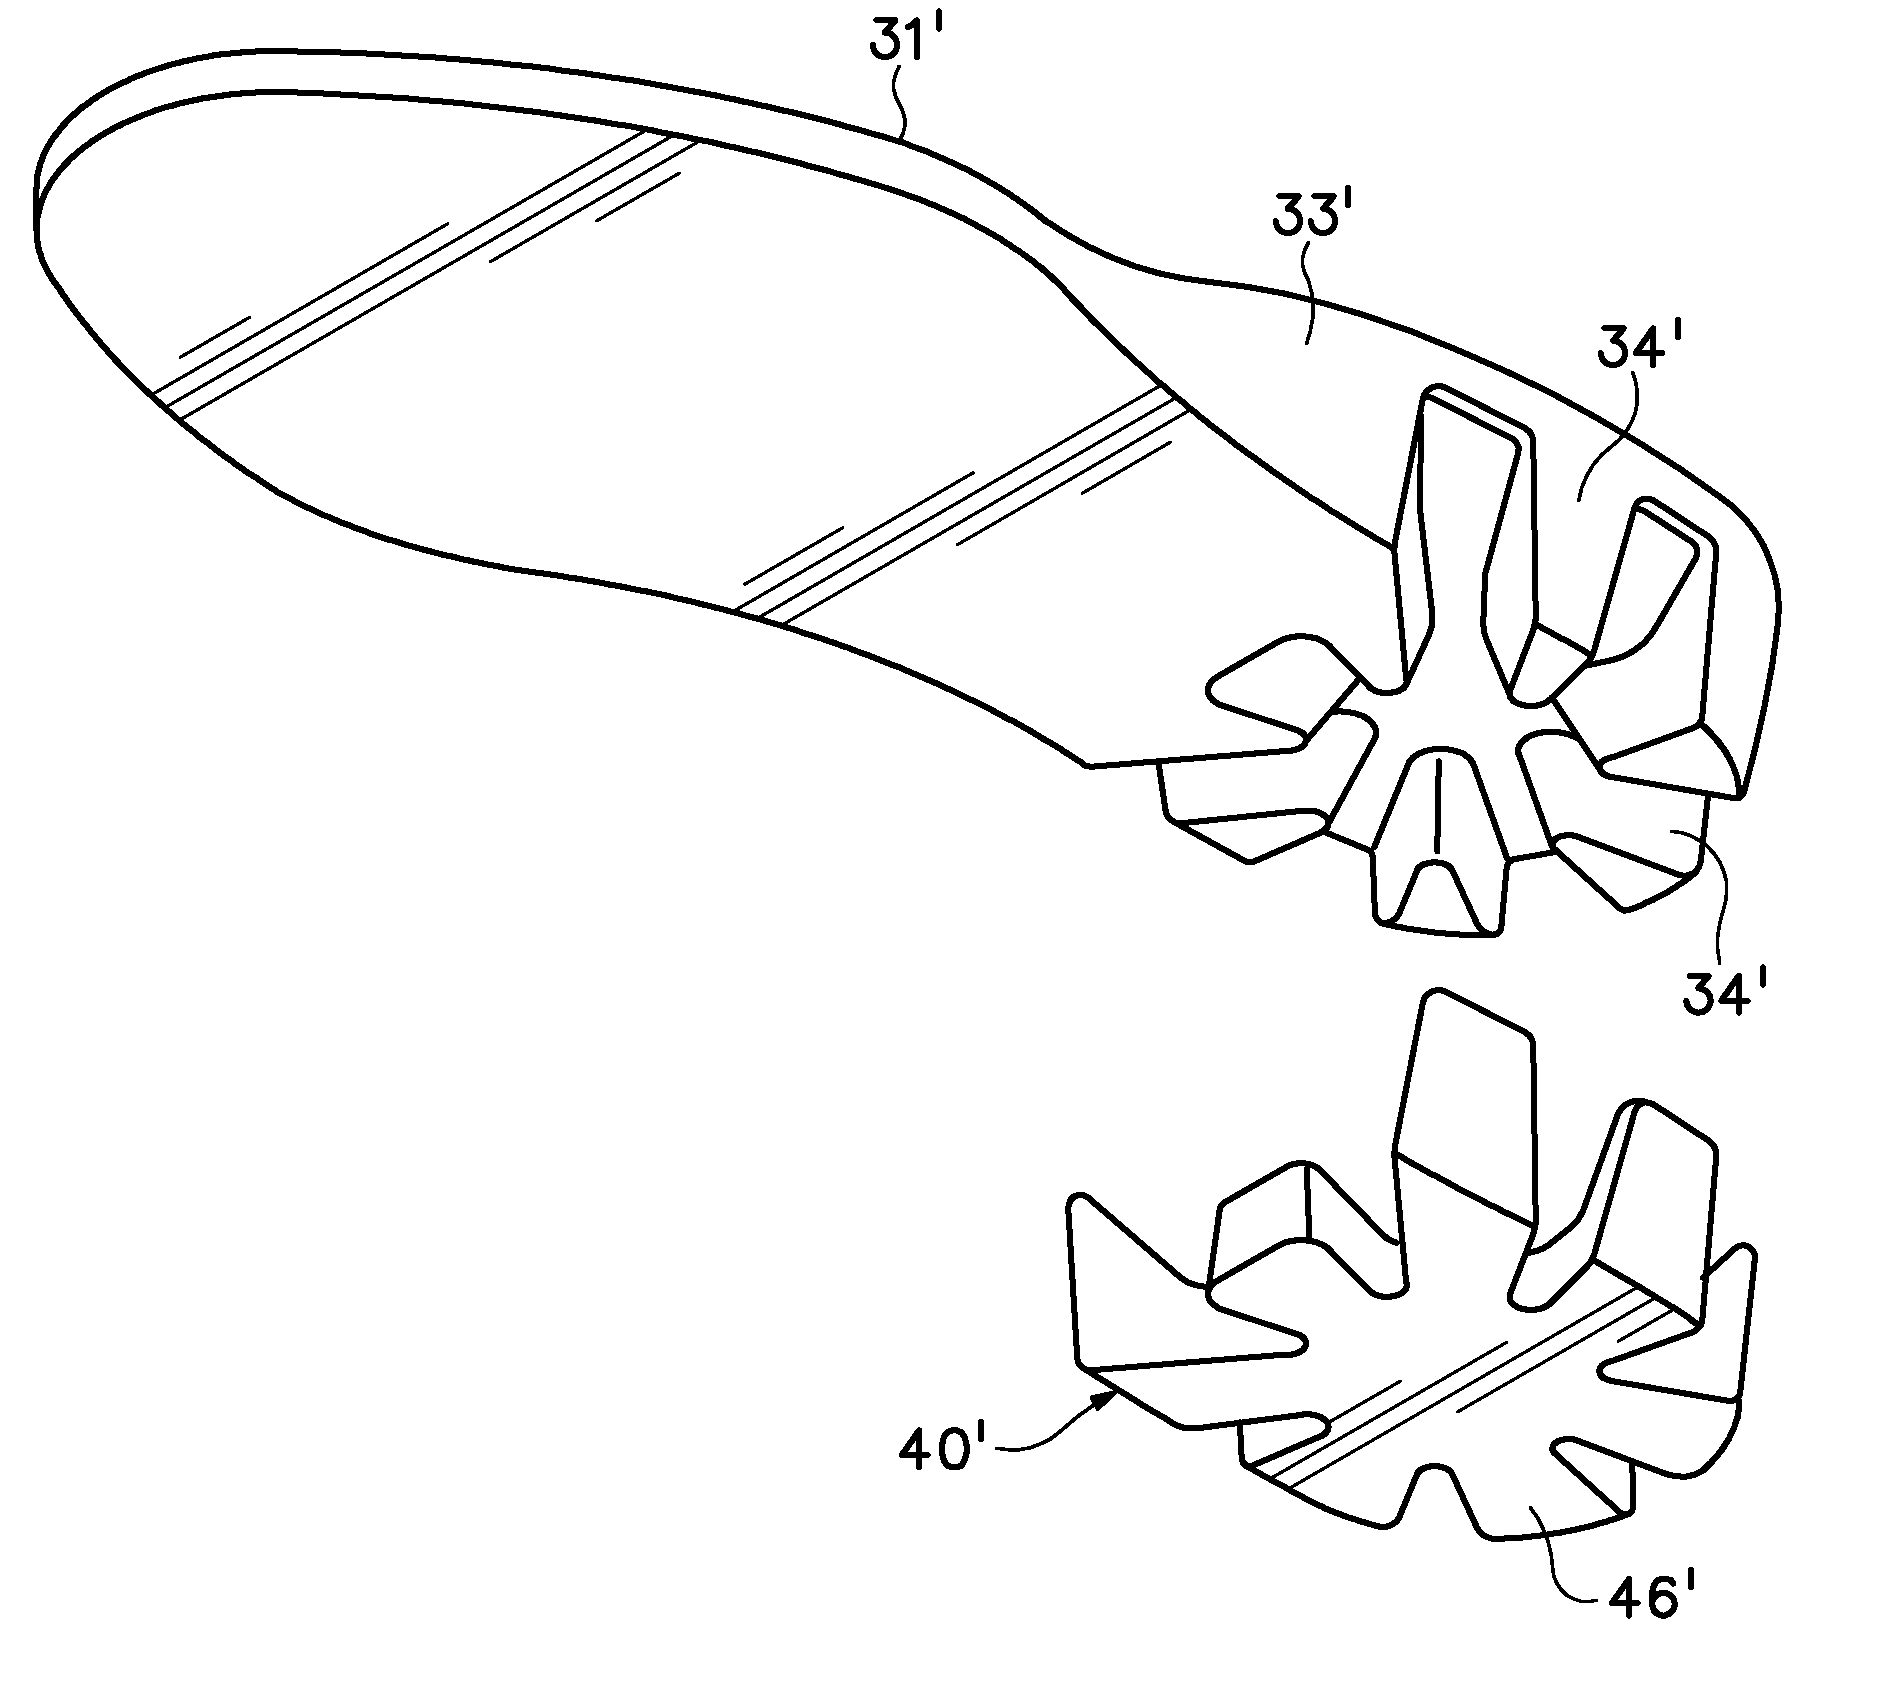 Footwear With A Sole Structure Incorporating A Lobed Fluid-Filled Chamber